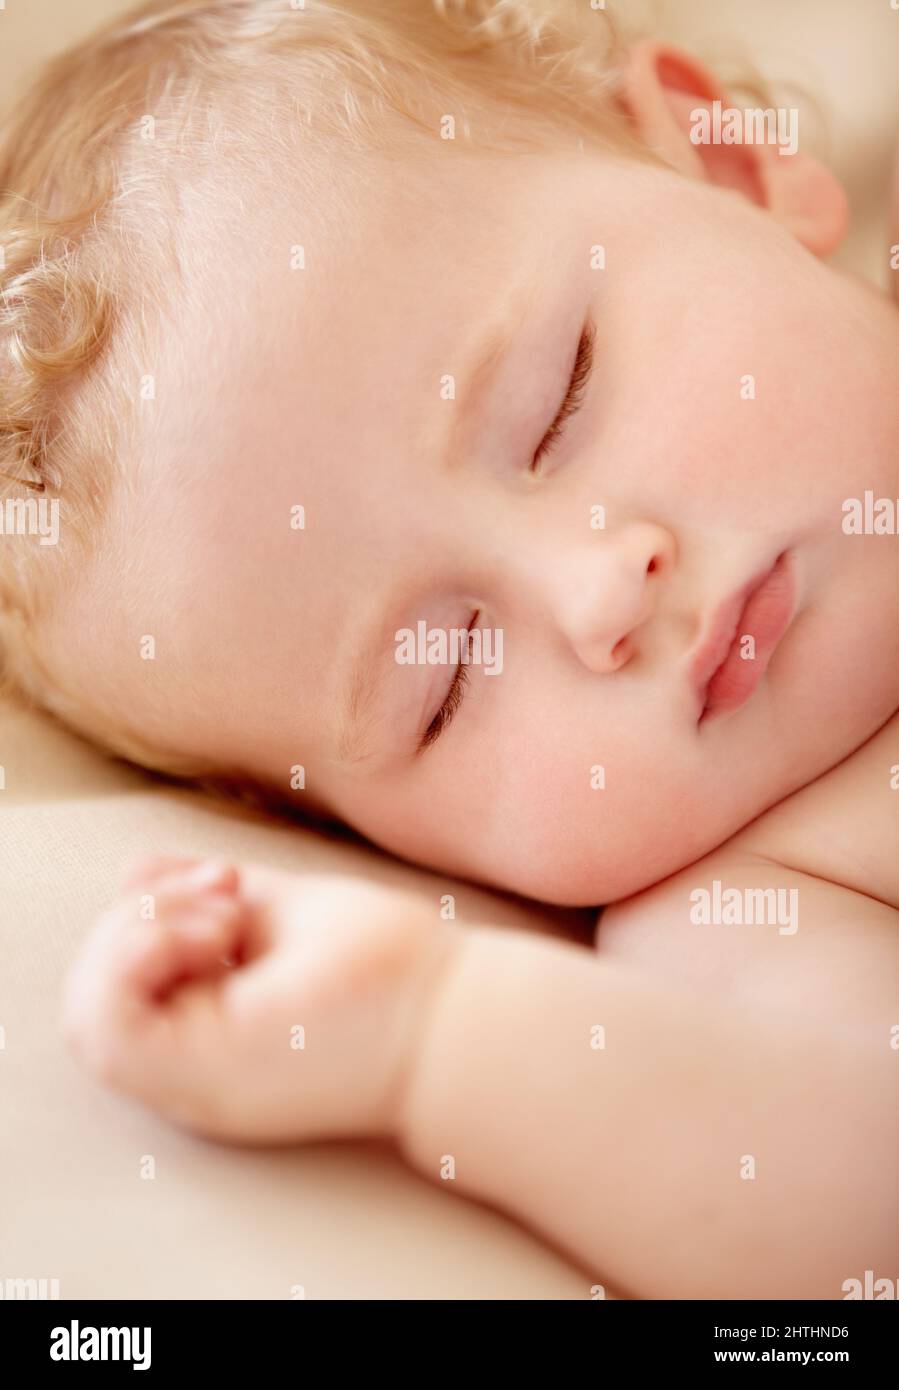 Napping soundly. Tiny baby boy lying fast asleep. Stock Photo